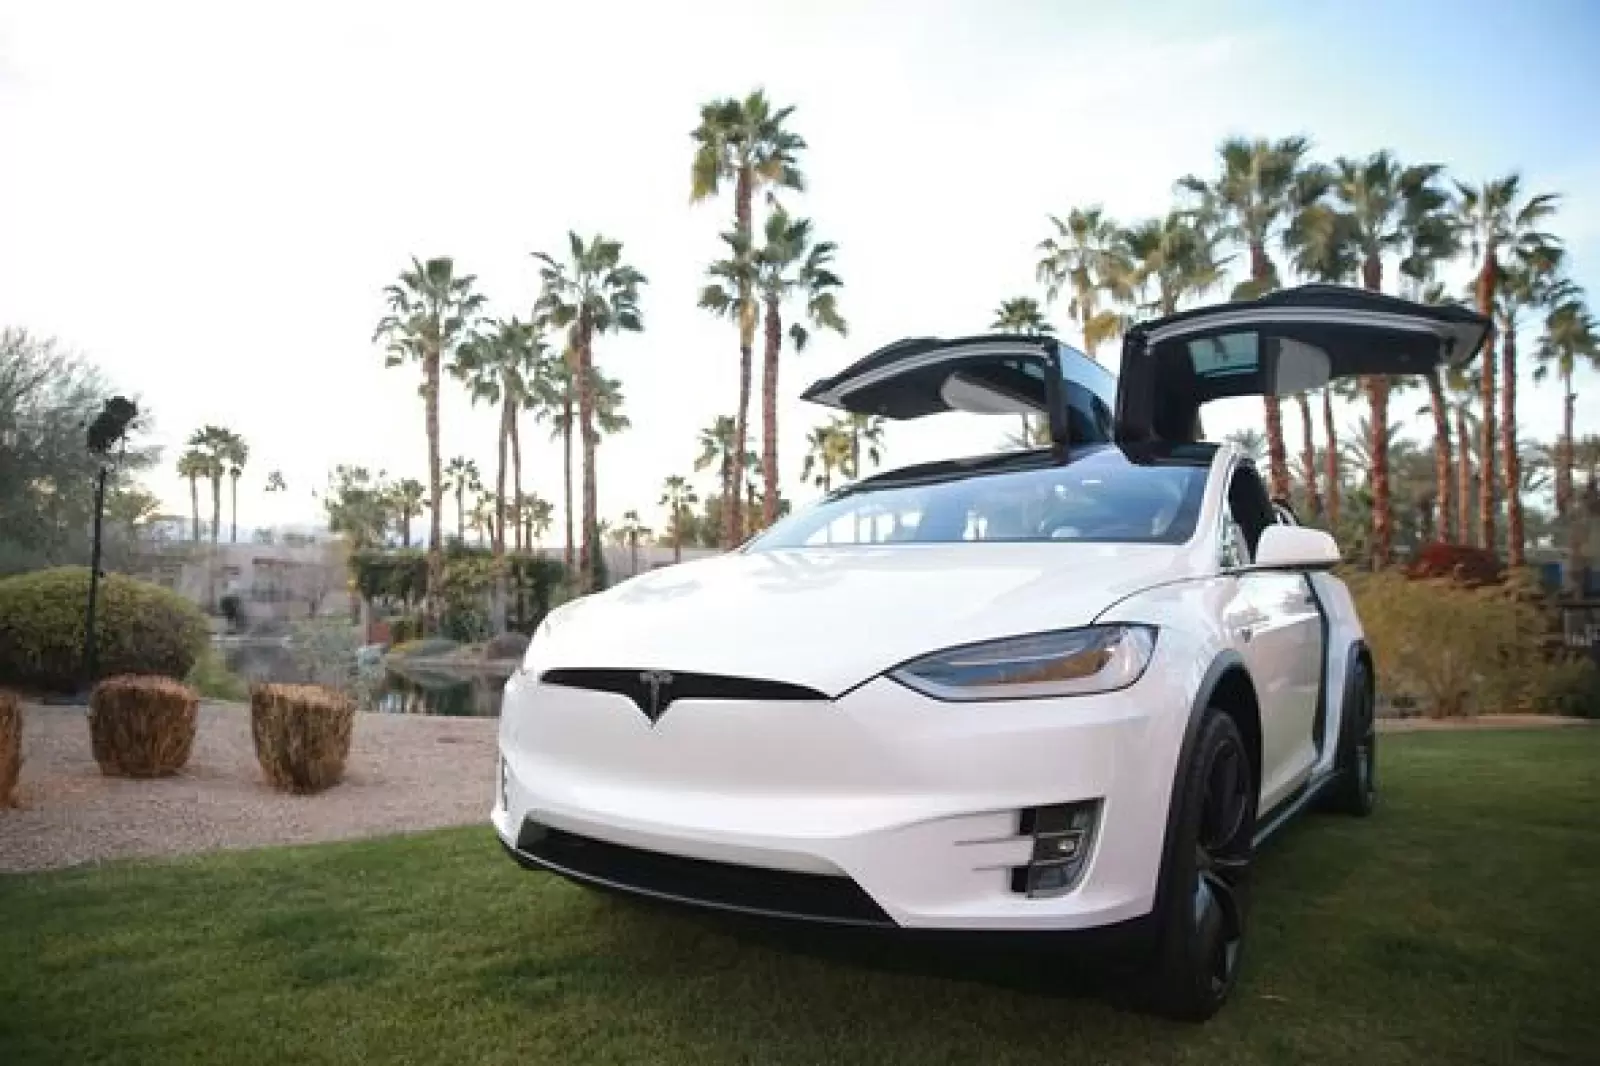 Two-year-old child starts Model X, EV climbs on mother, woman files suit against Tesla